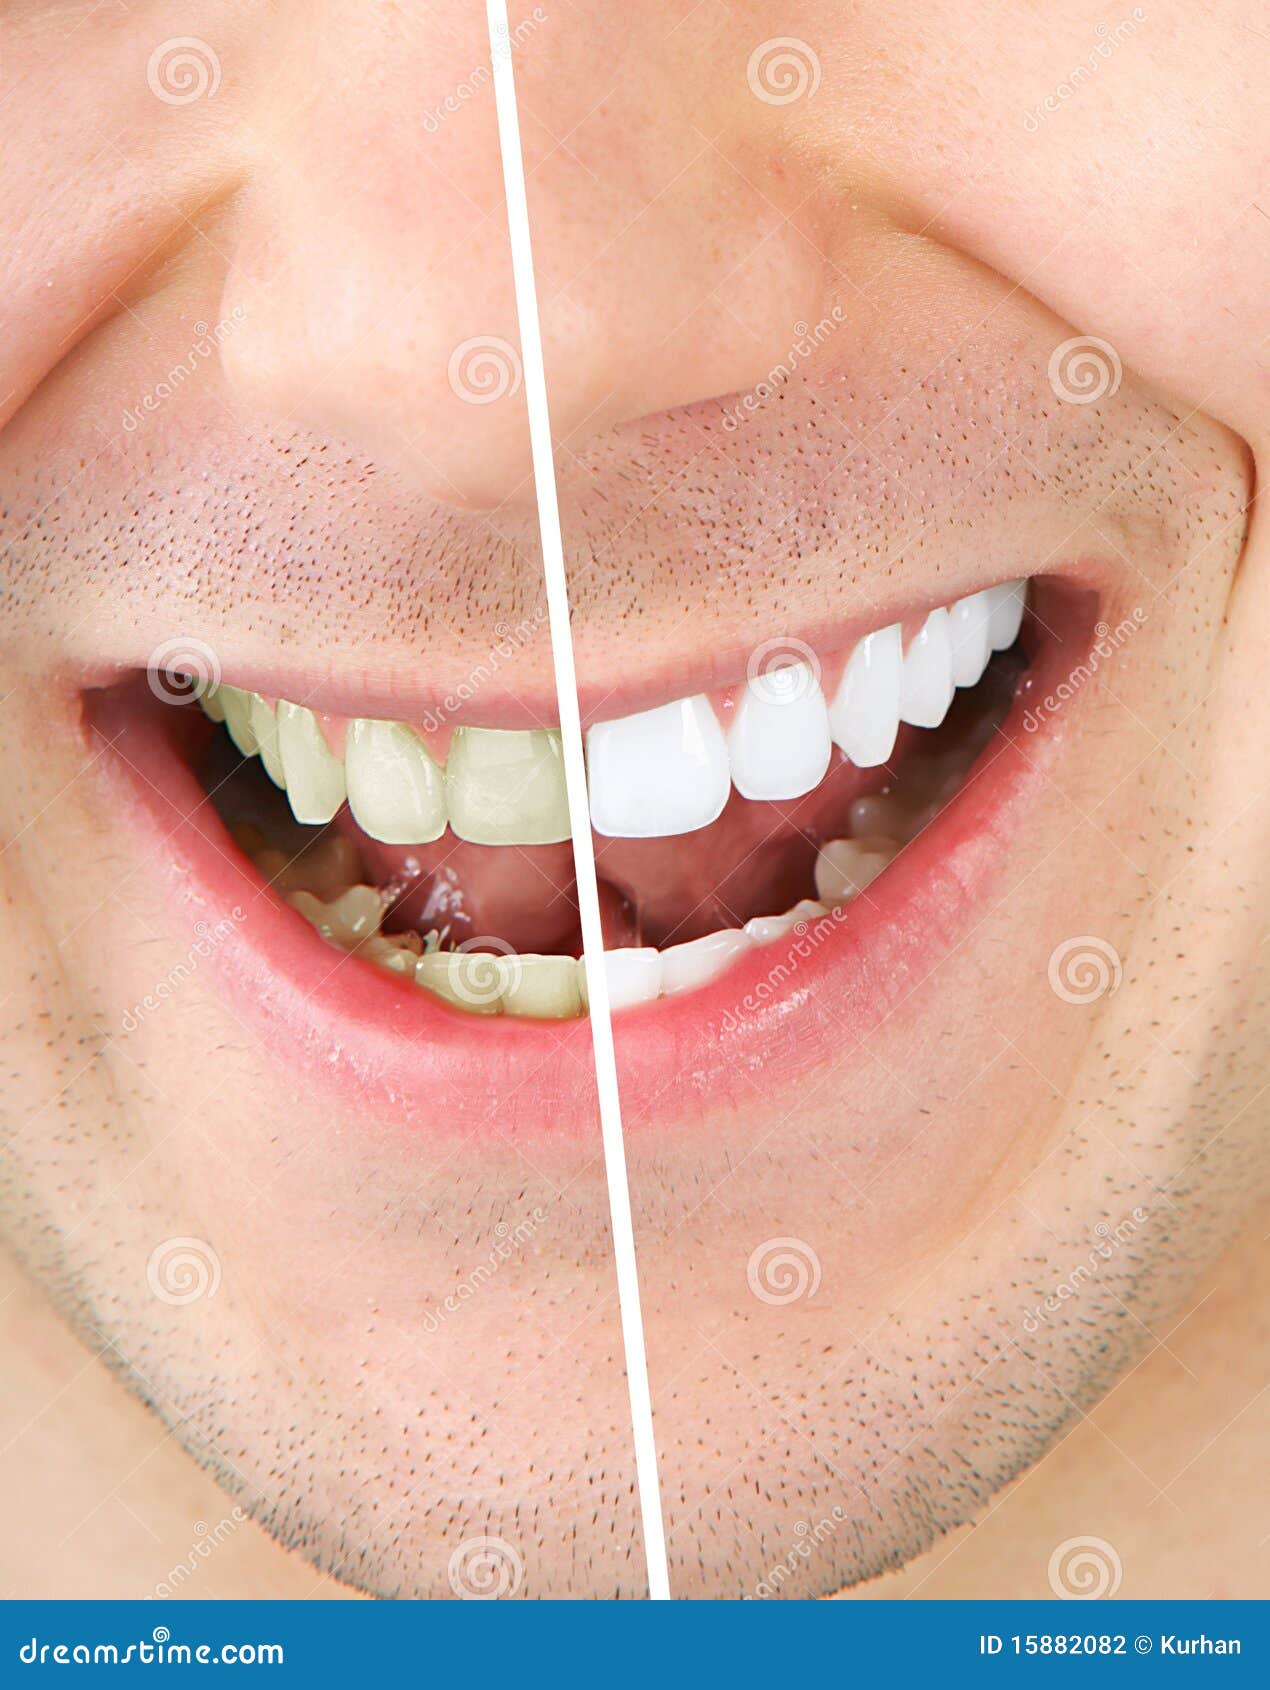 Tooth Whitening Stock Photography - Image: 15882082